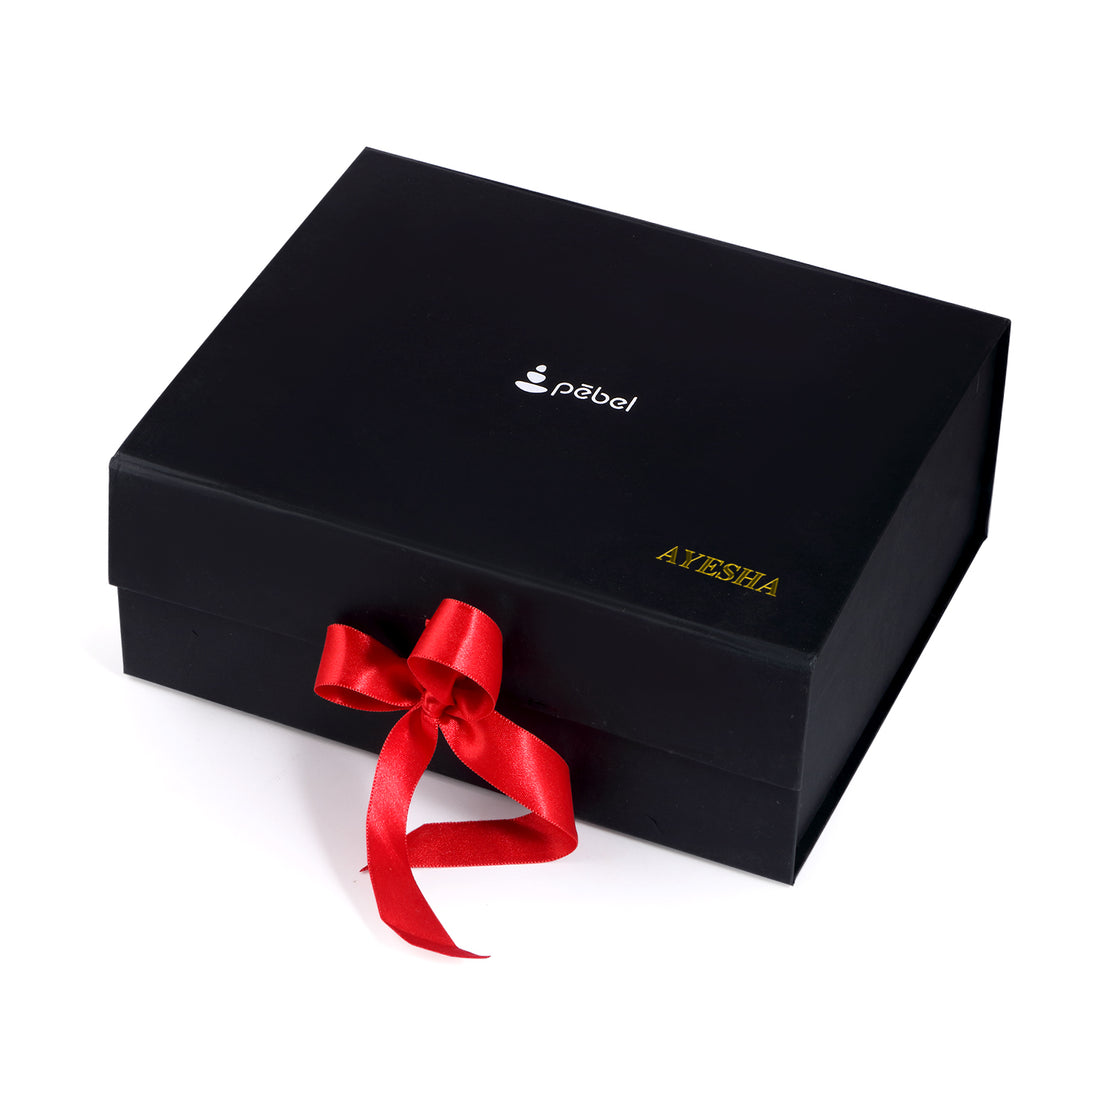 Buy The Unwind Box / Relaxation gift hamper | The Gourmet Box